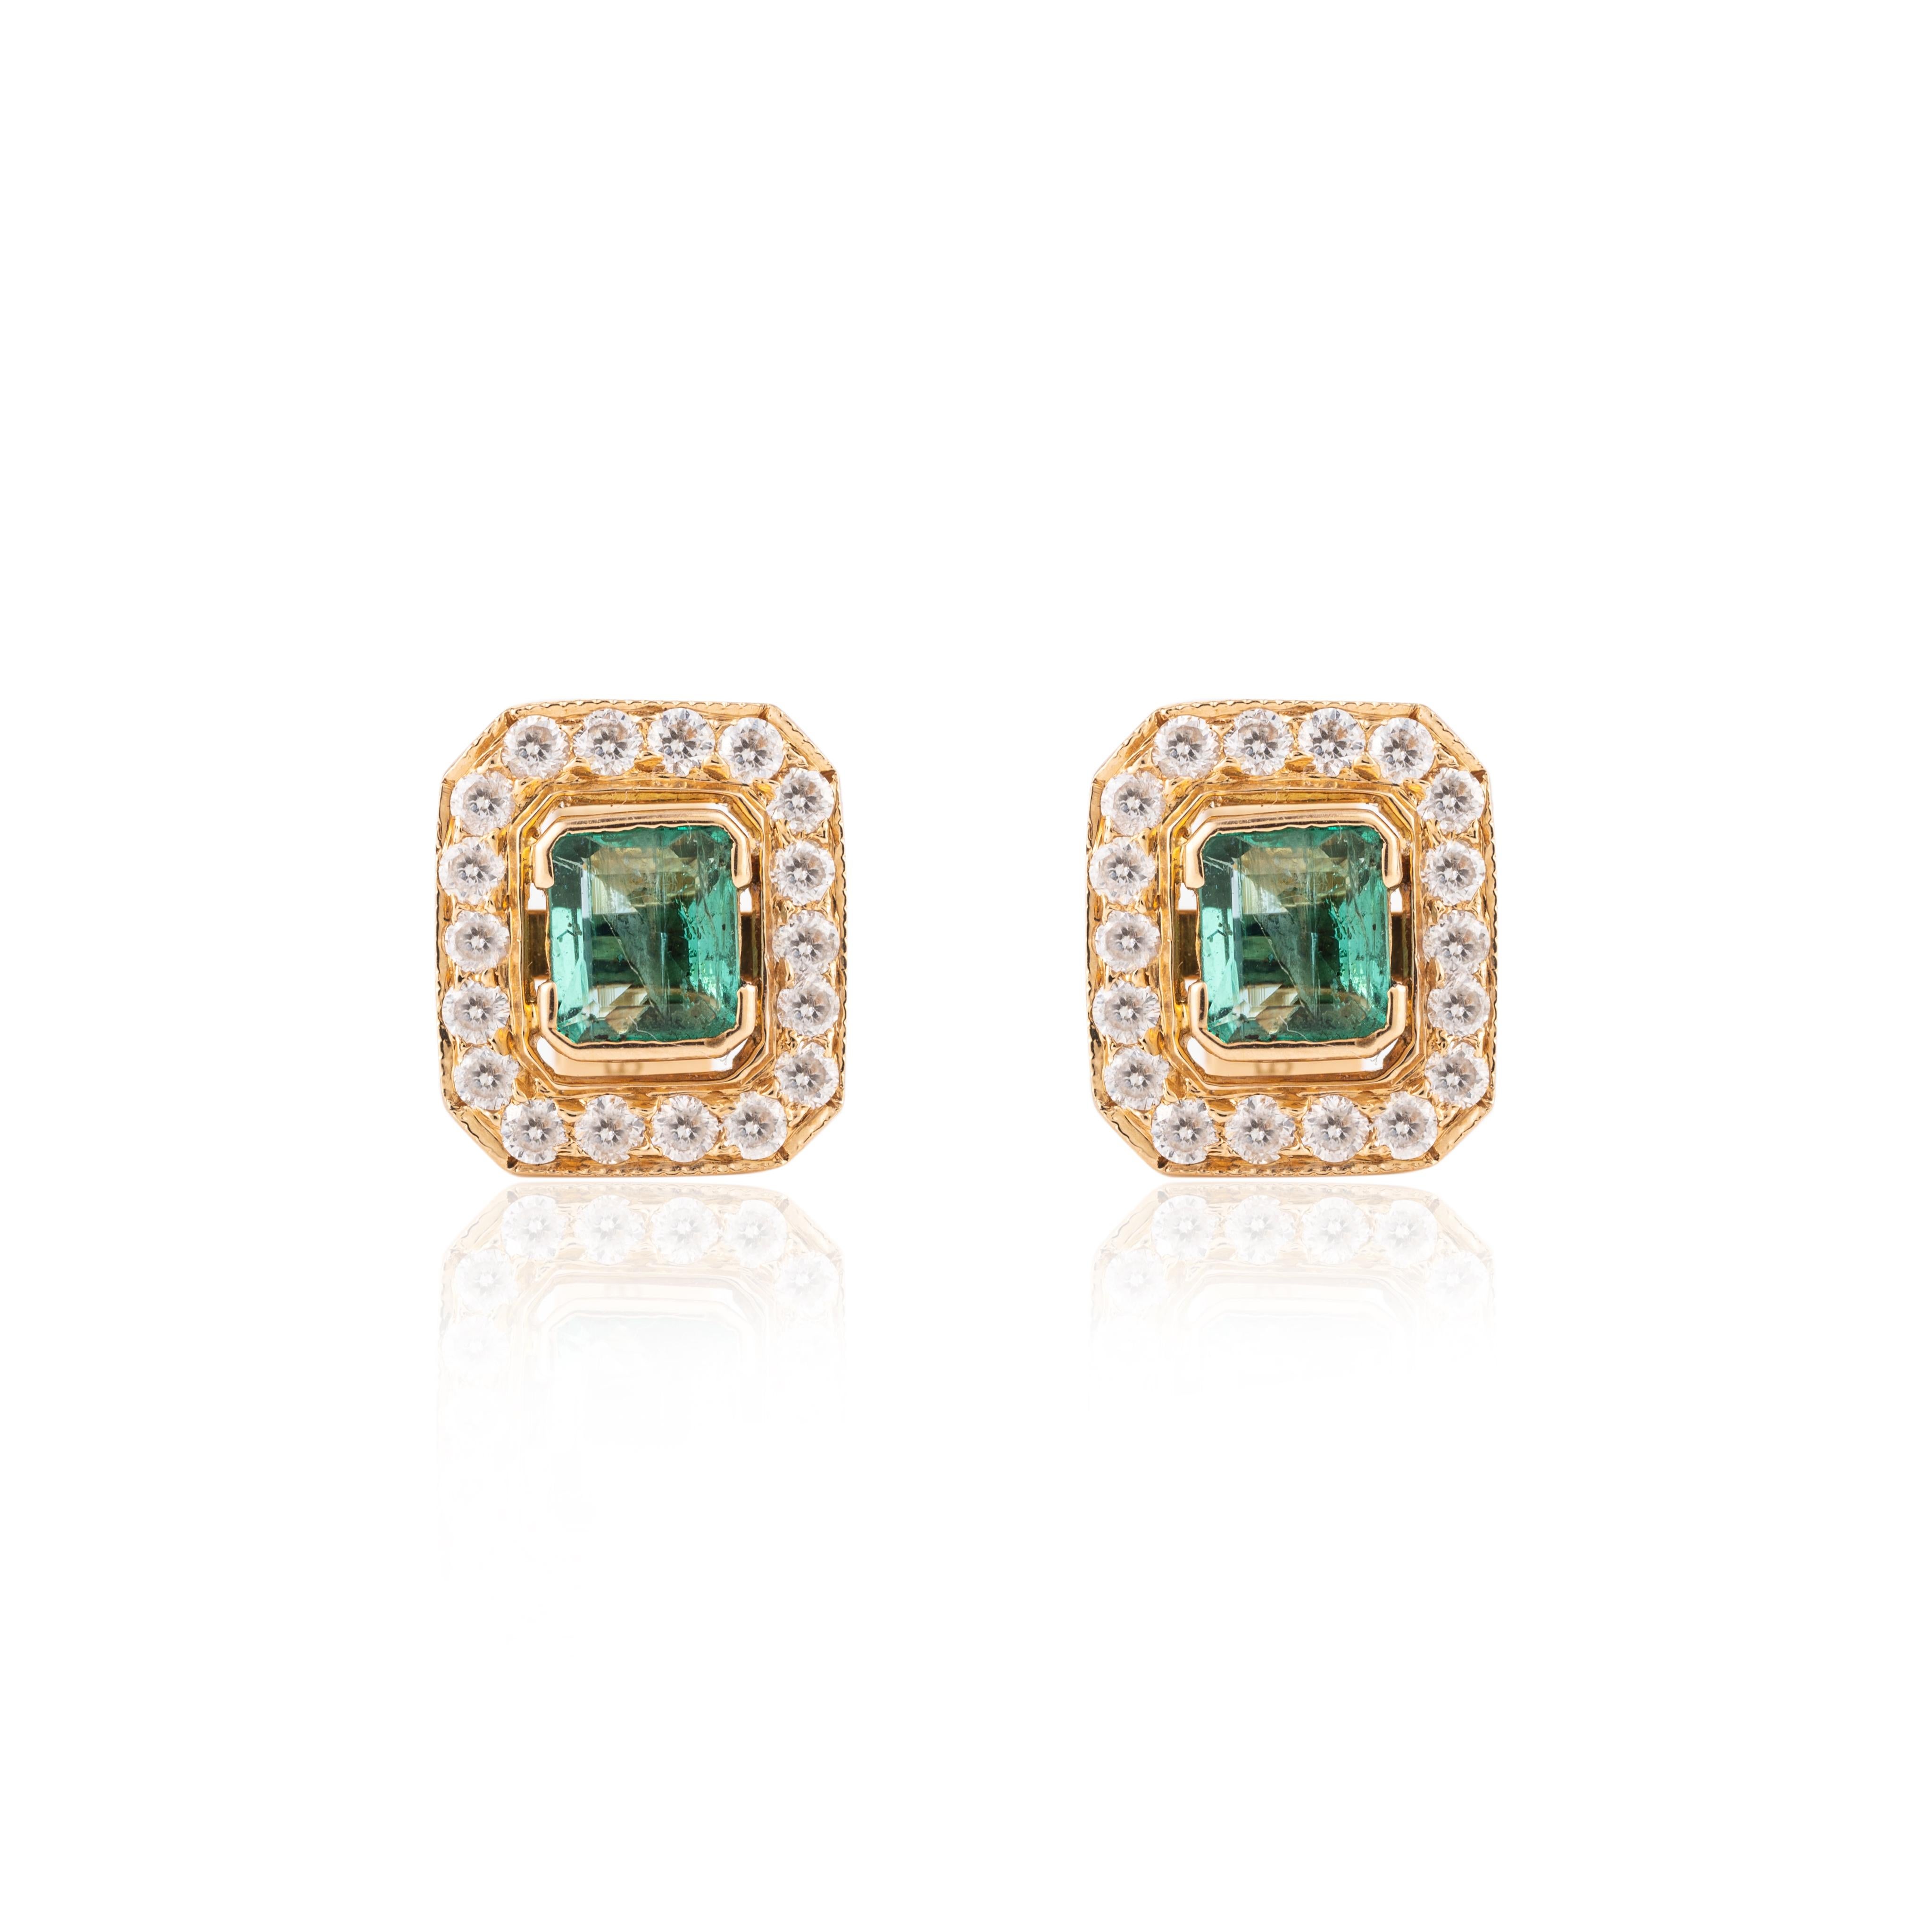 Art Deco Octagon Cut Emerald Halo Diamond Big Stud Earrings in 18k Yellow Gold for Her For Sale